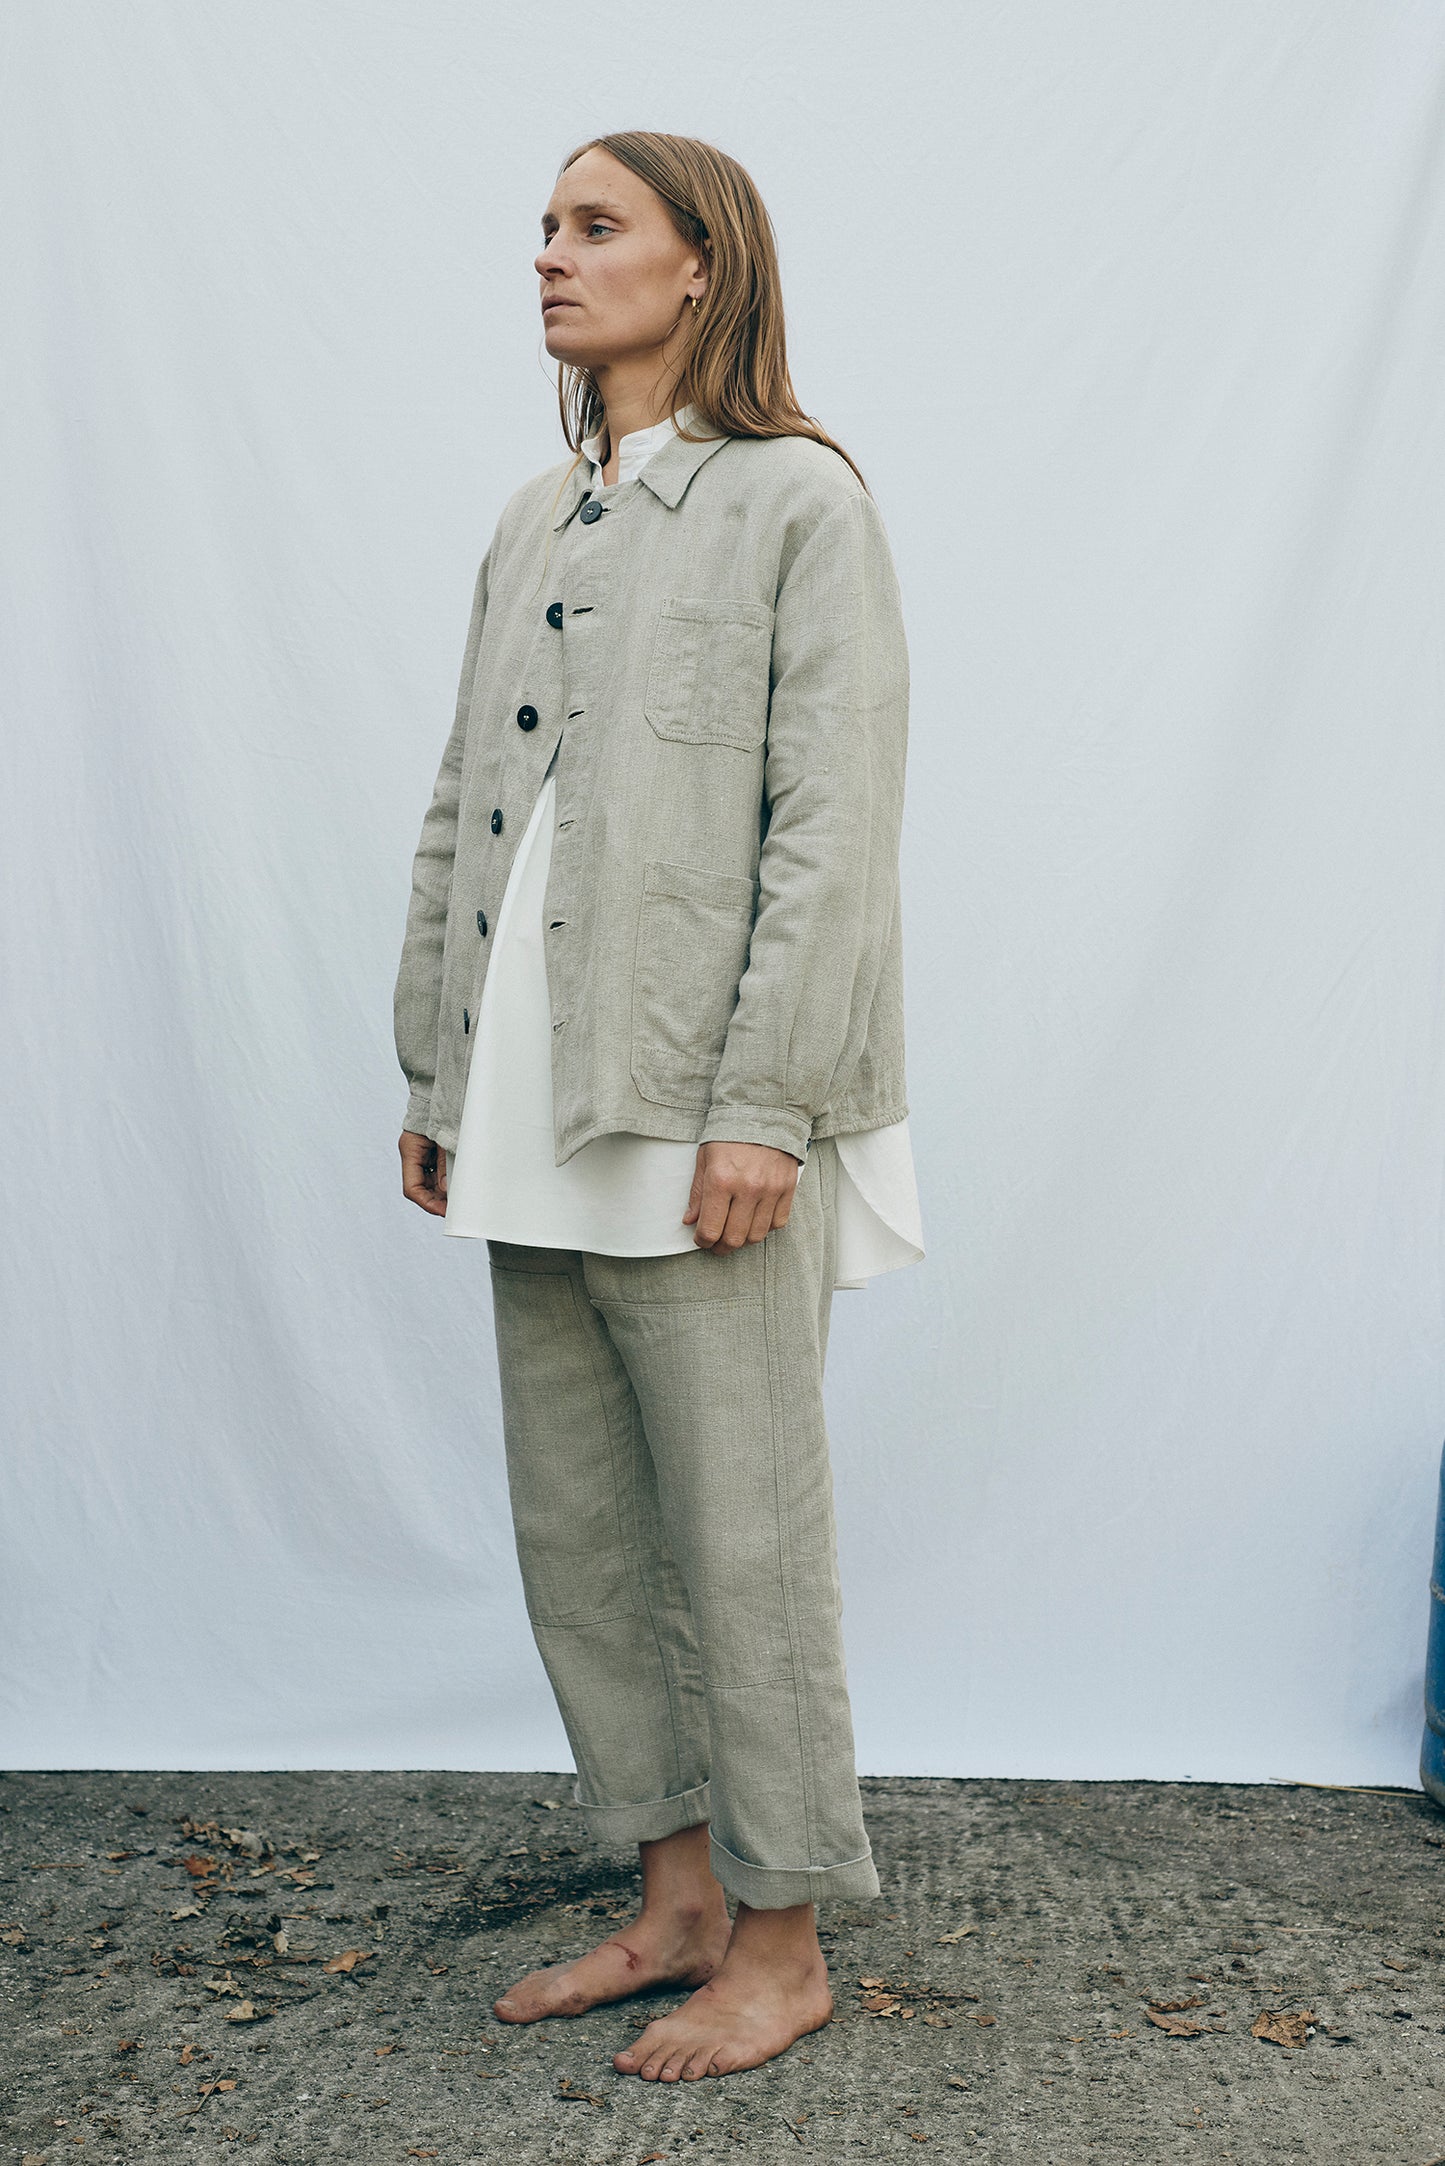 Propagator's Jacket with Liner - Natural Raw Linen